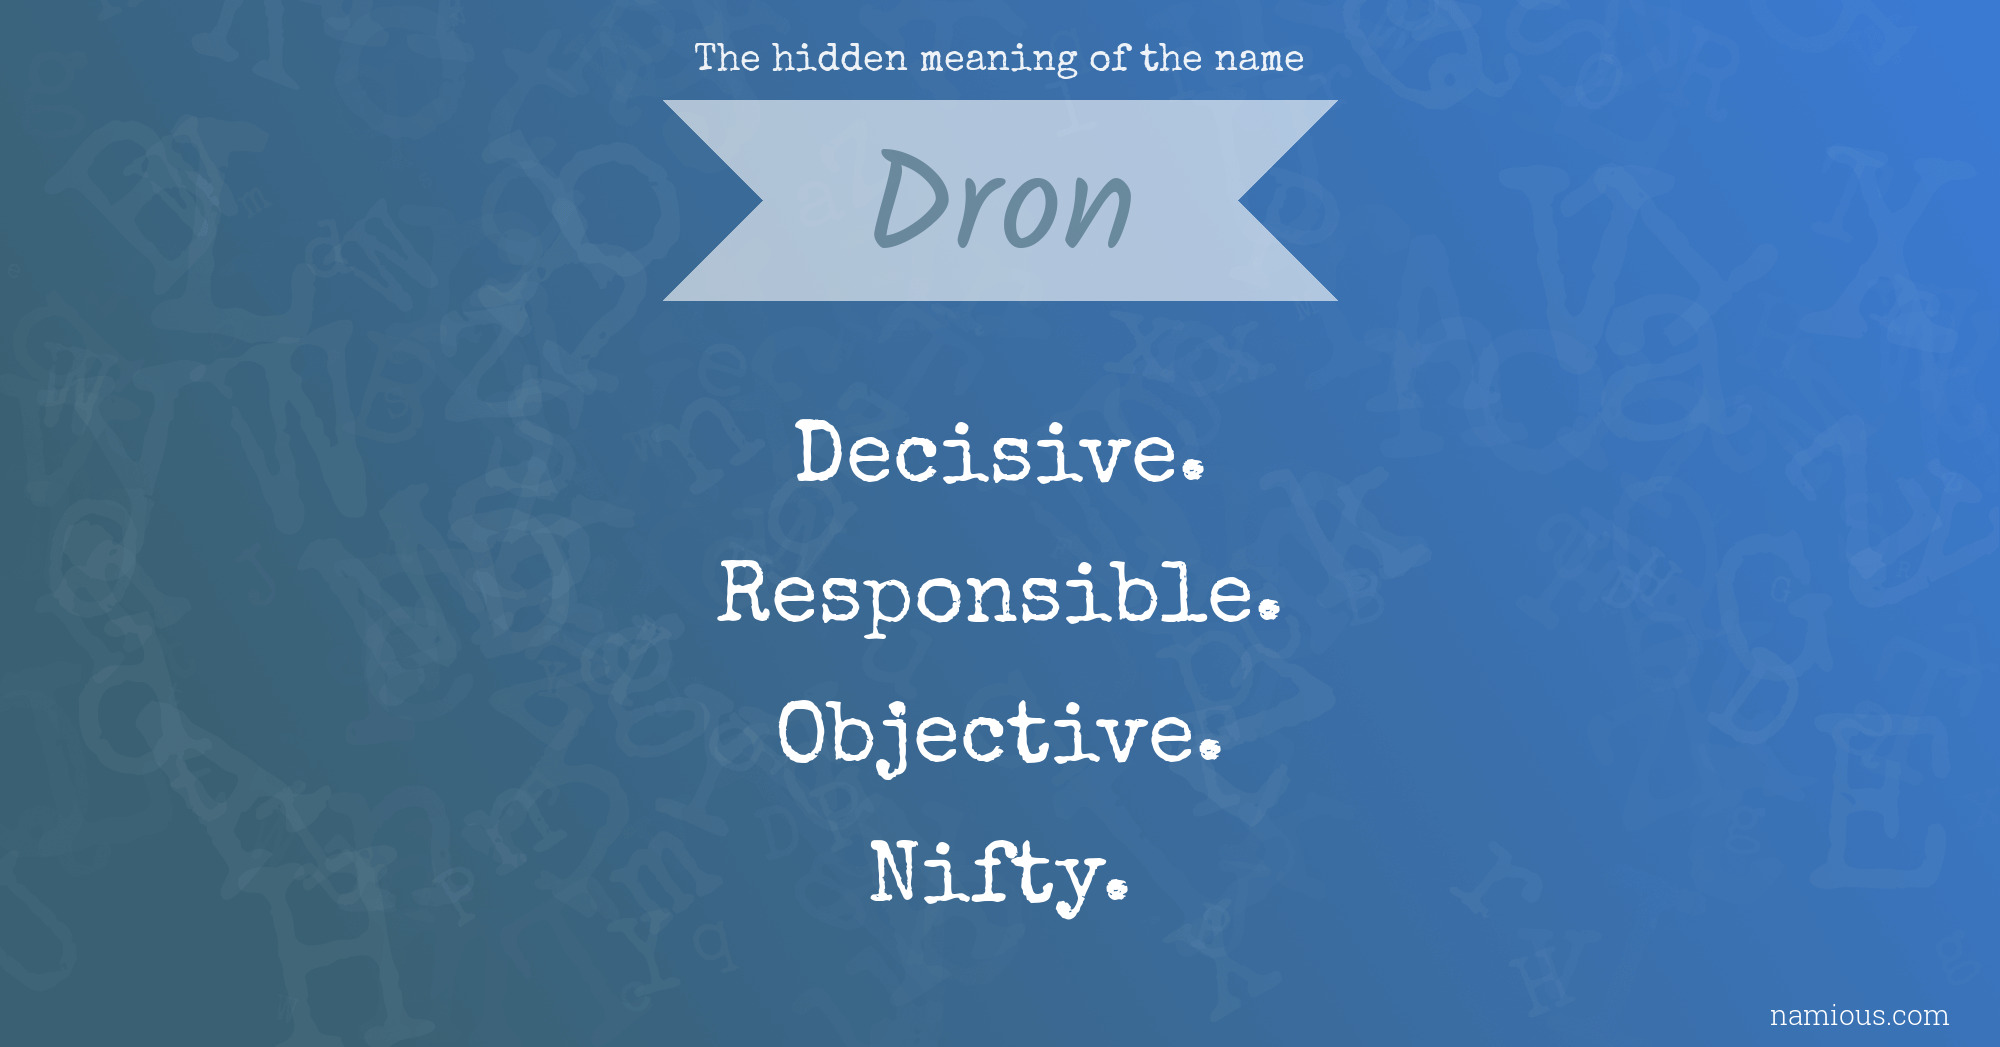 The hidden meaning of the name Dron